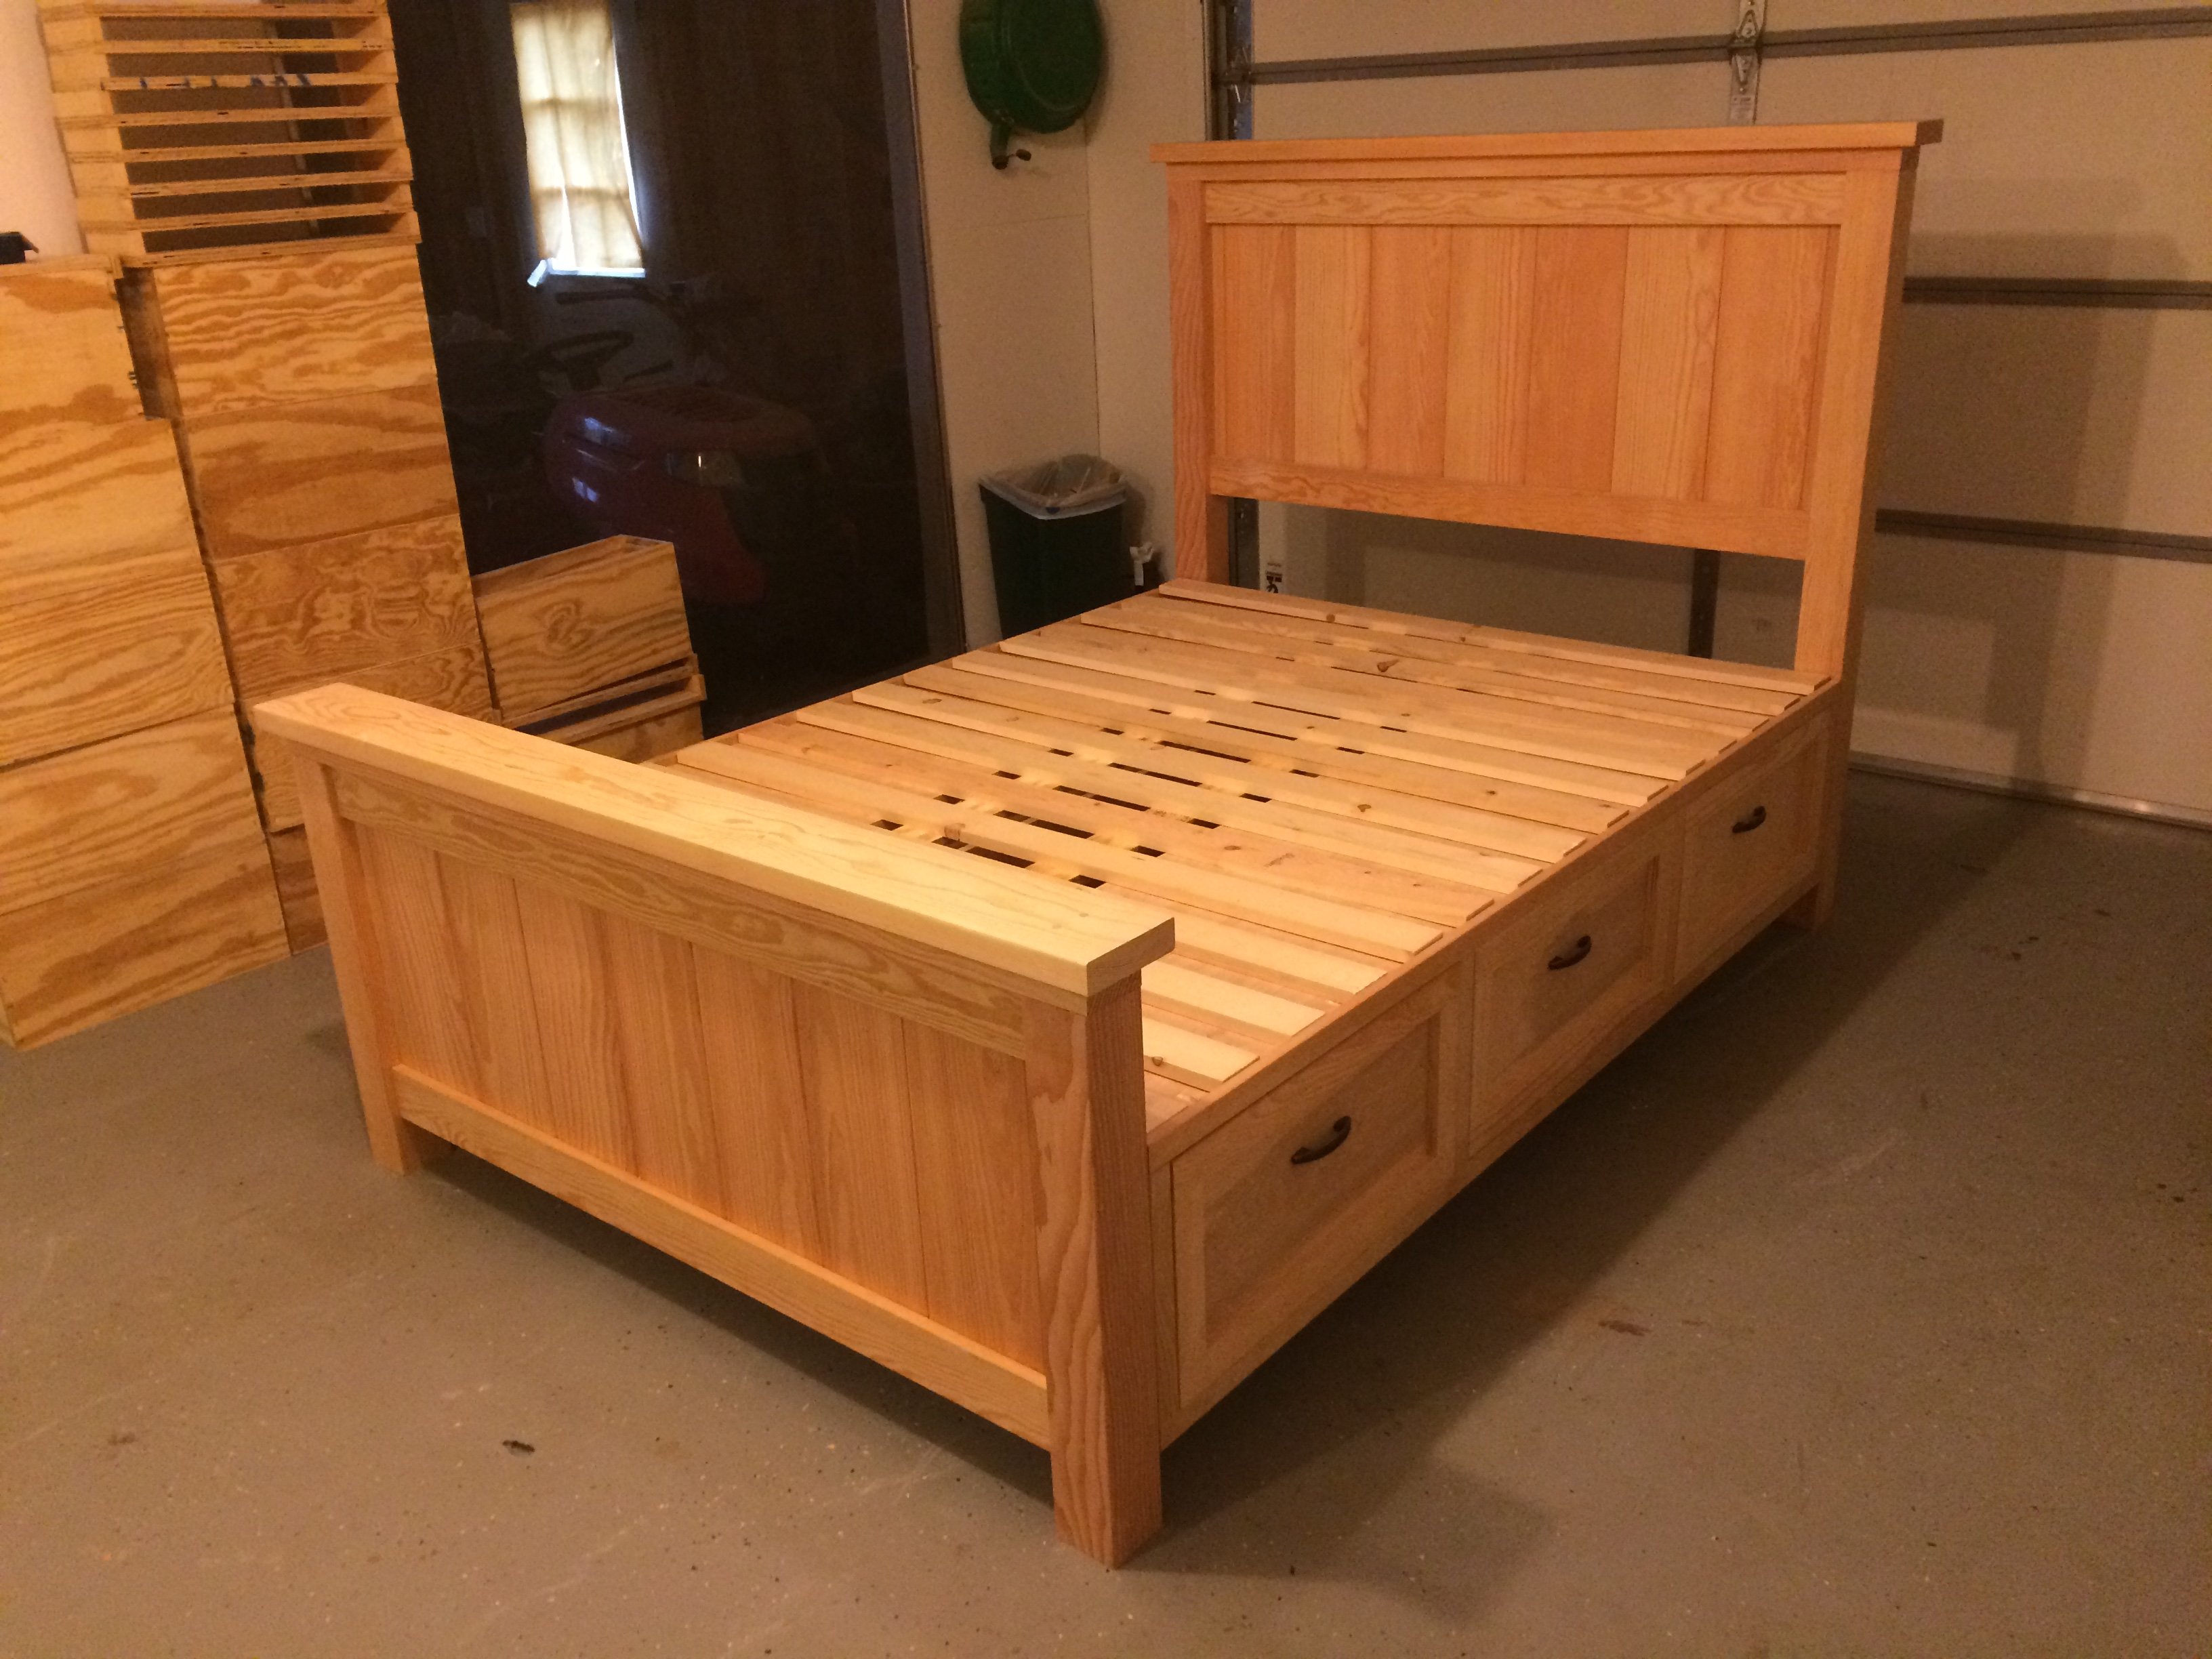 Farmhouse Storage Bed With Drawers, Easy Diy Twin Bed Frame With Storage